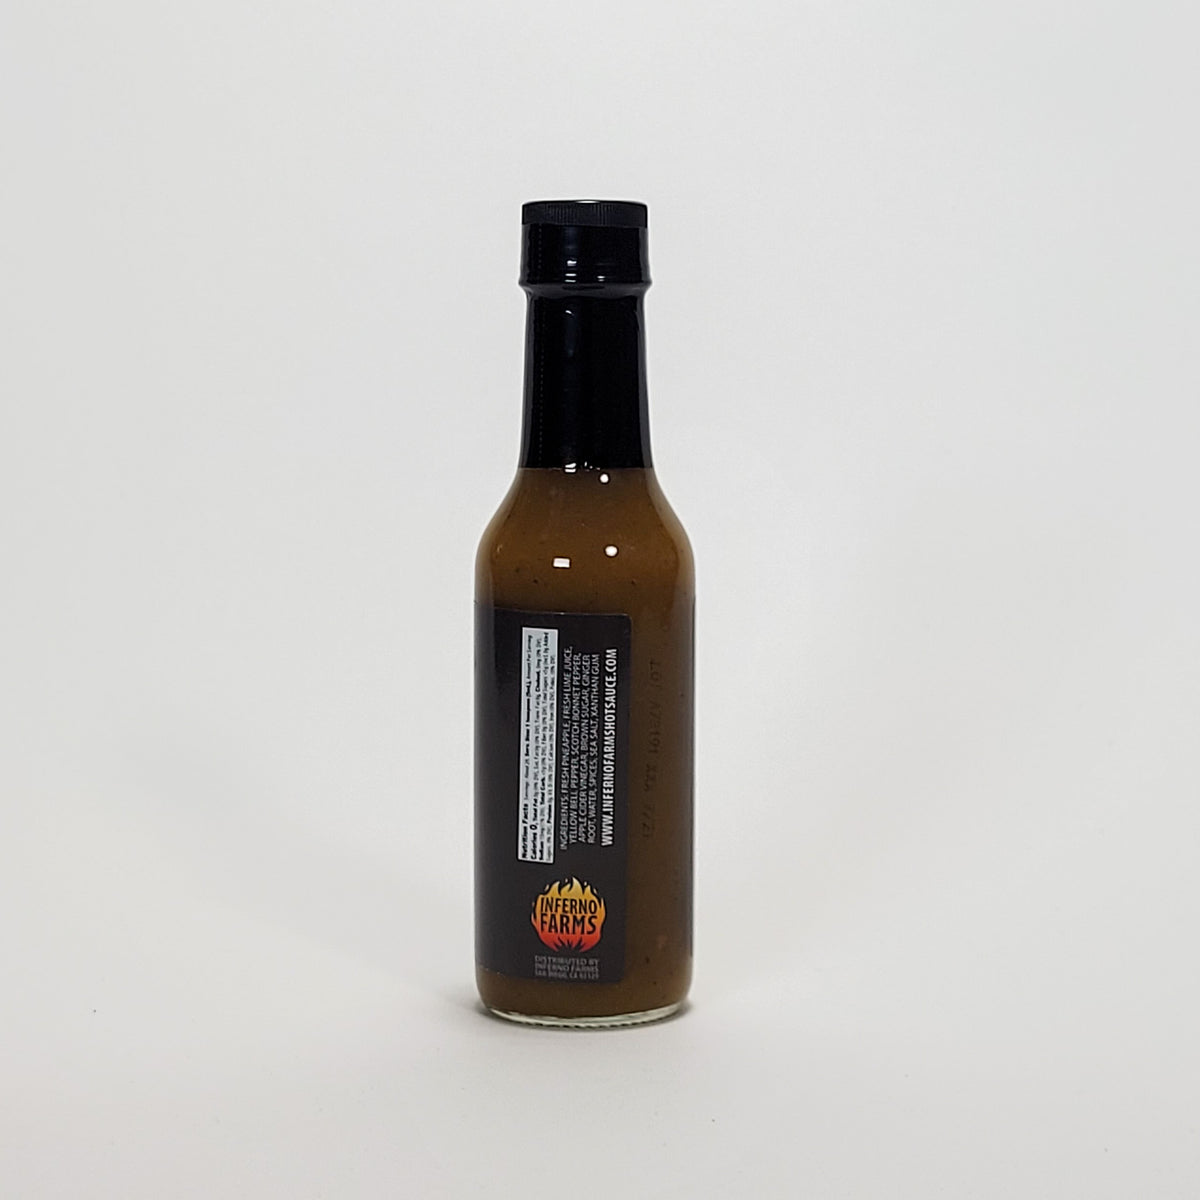 Inferno farms pineapple xxxpress hot sauce back